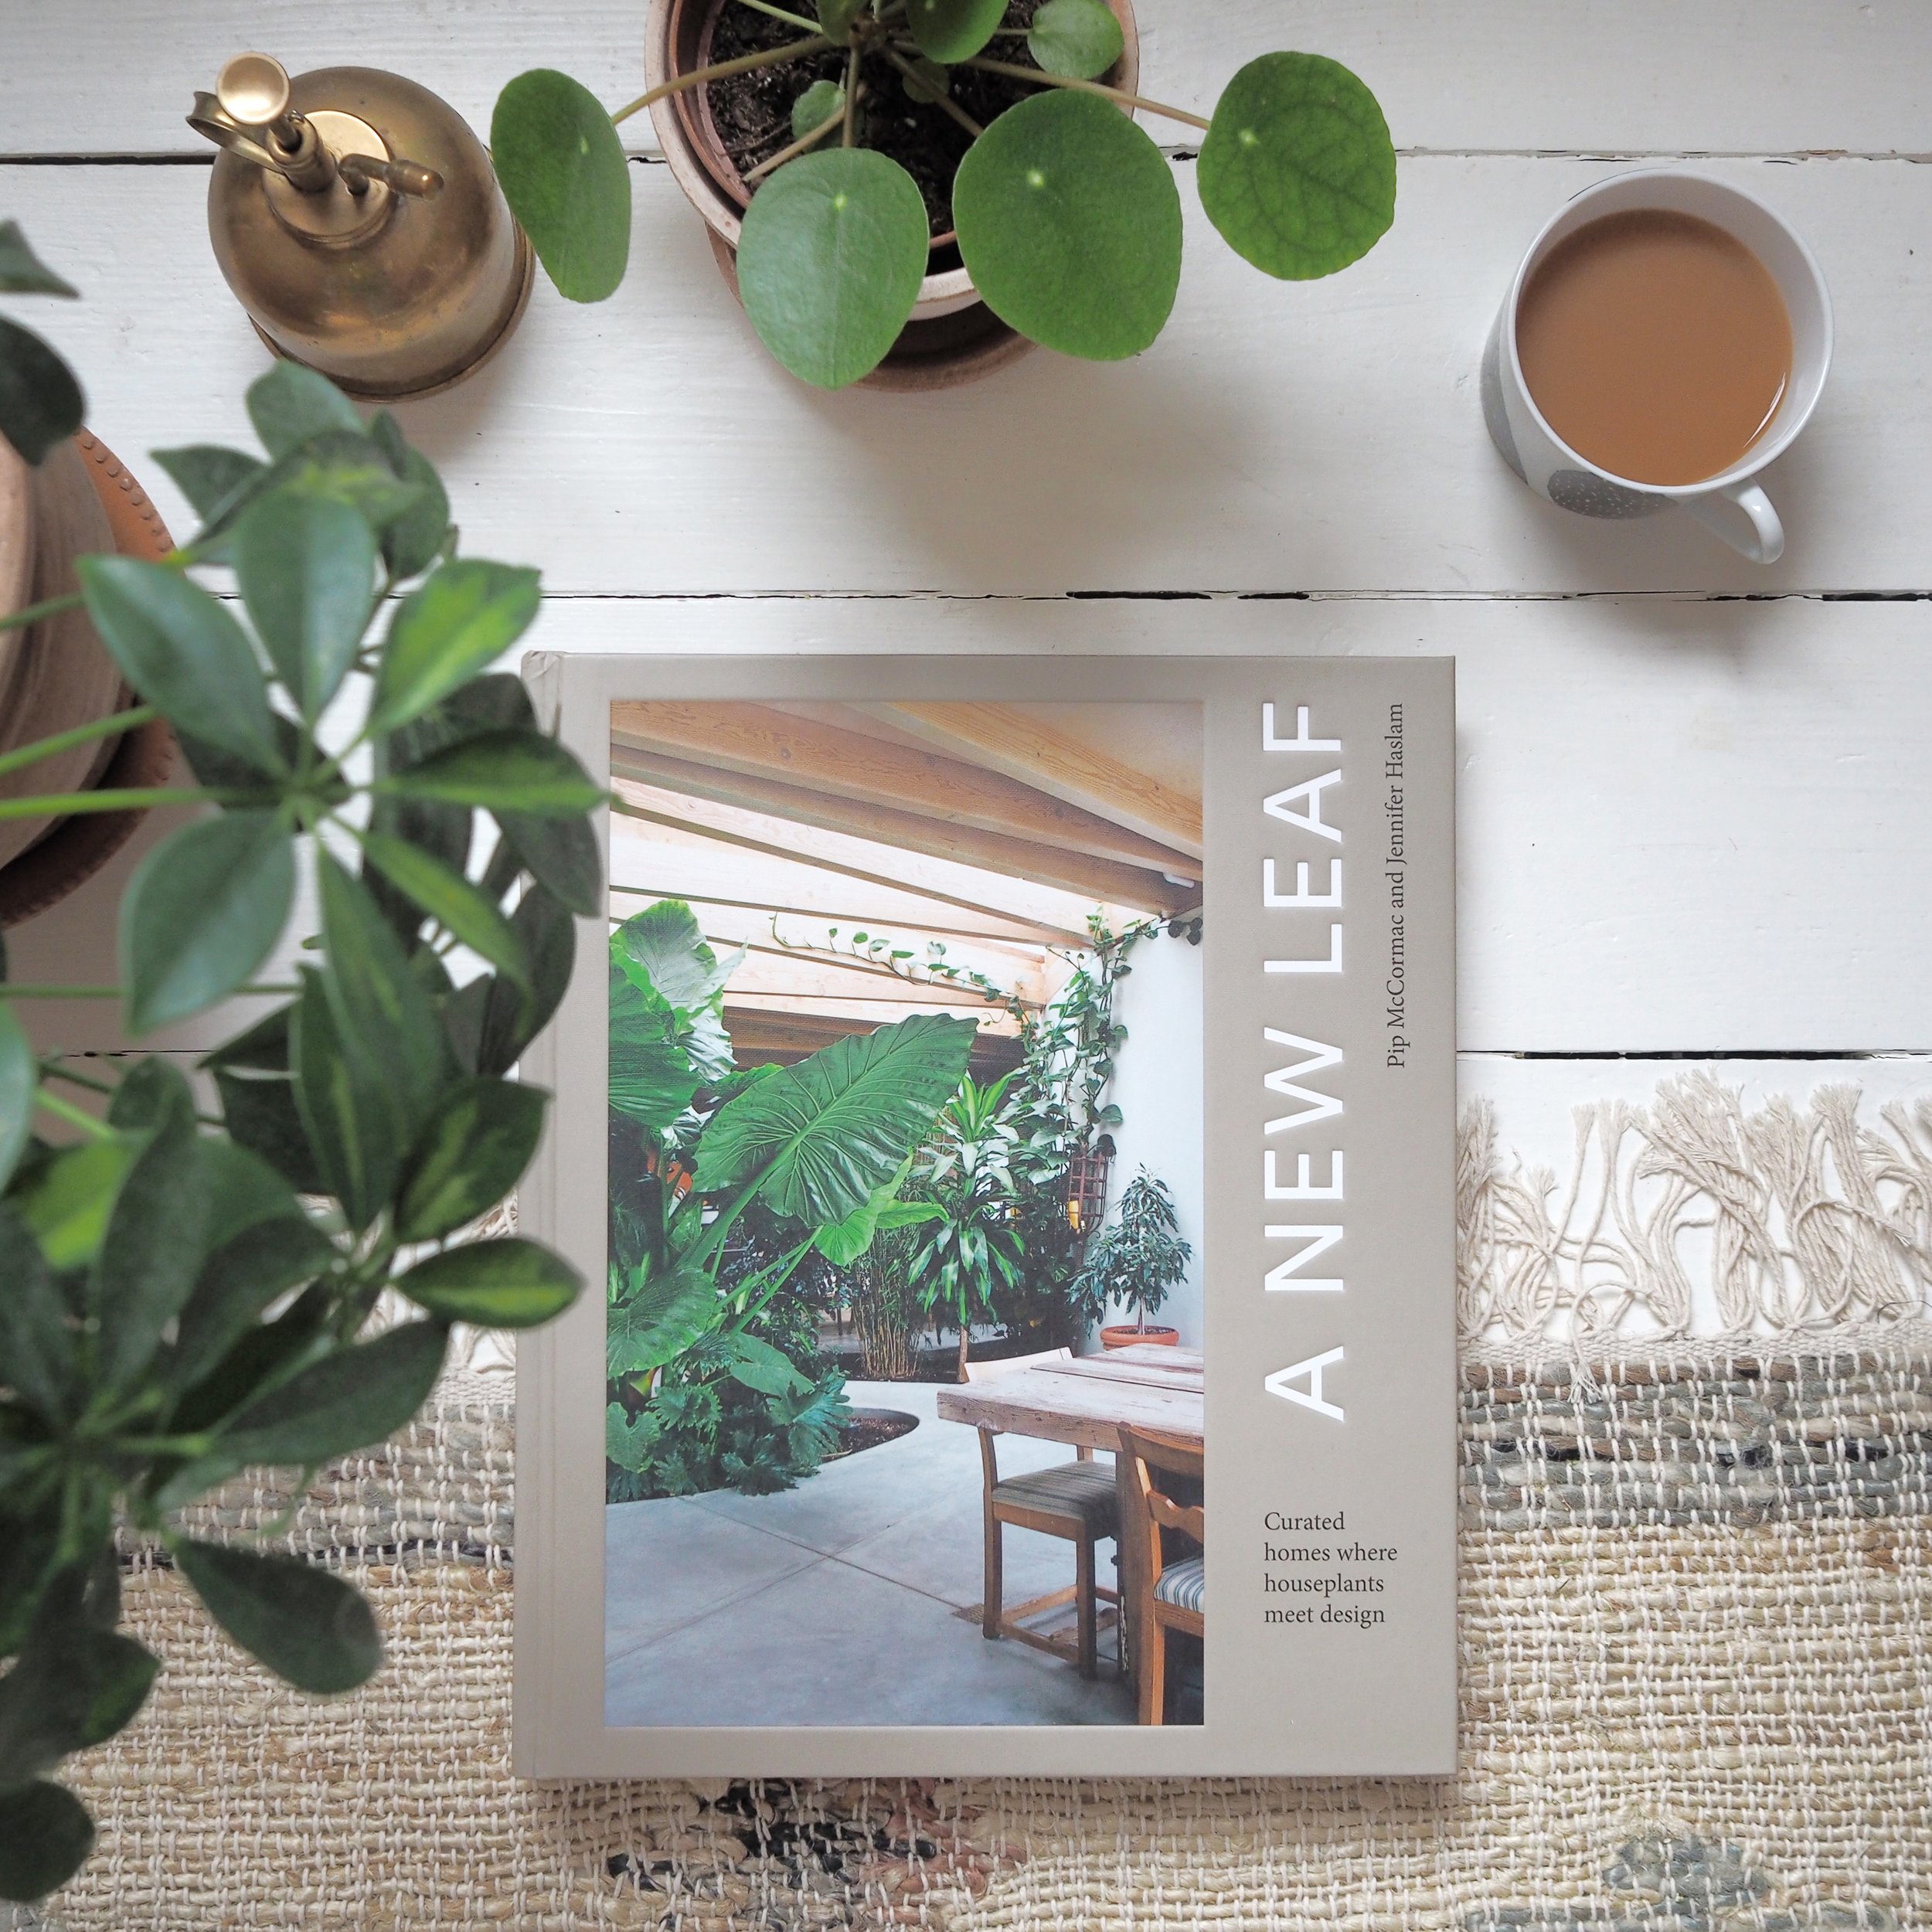 Coffee table book A New Leaf amongst houseplants and a cup of tea